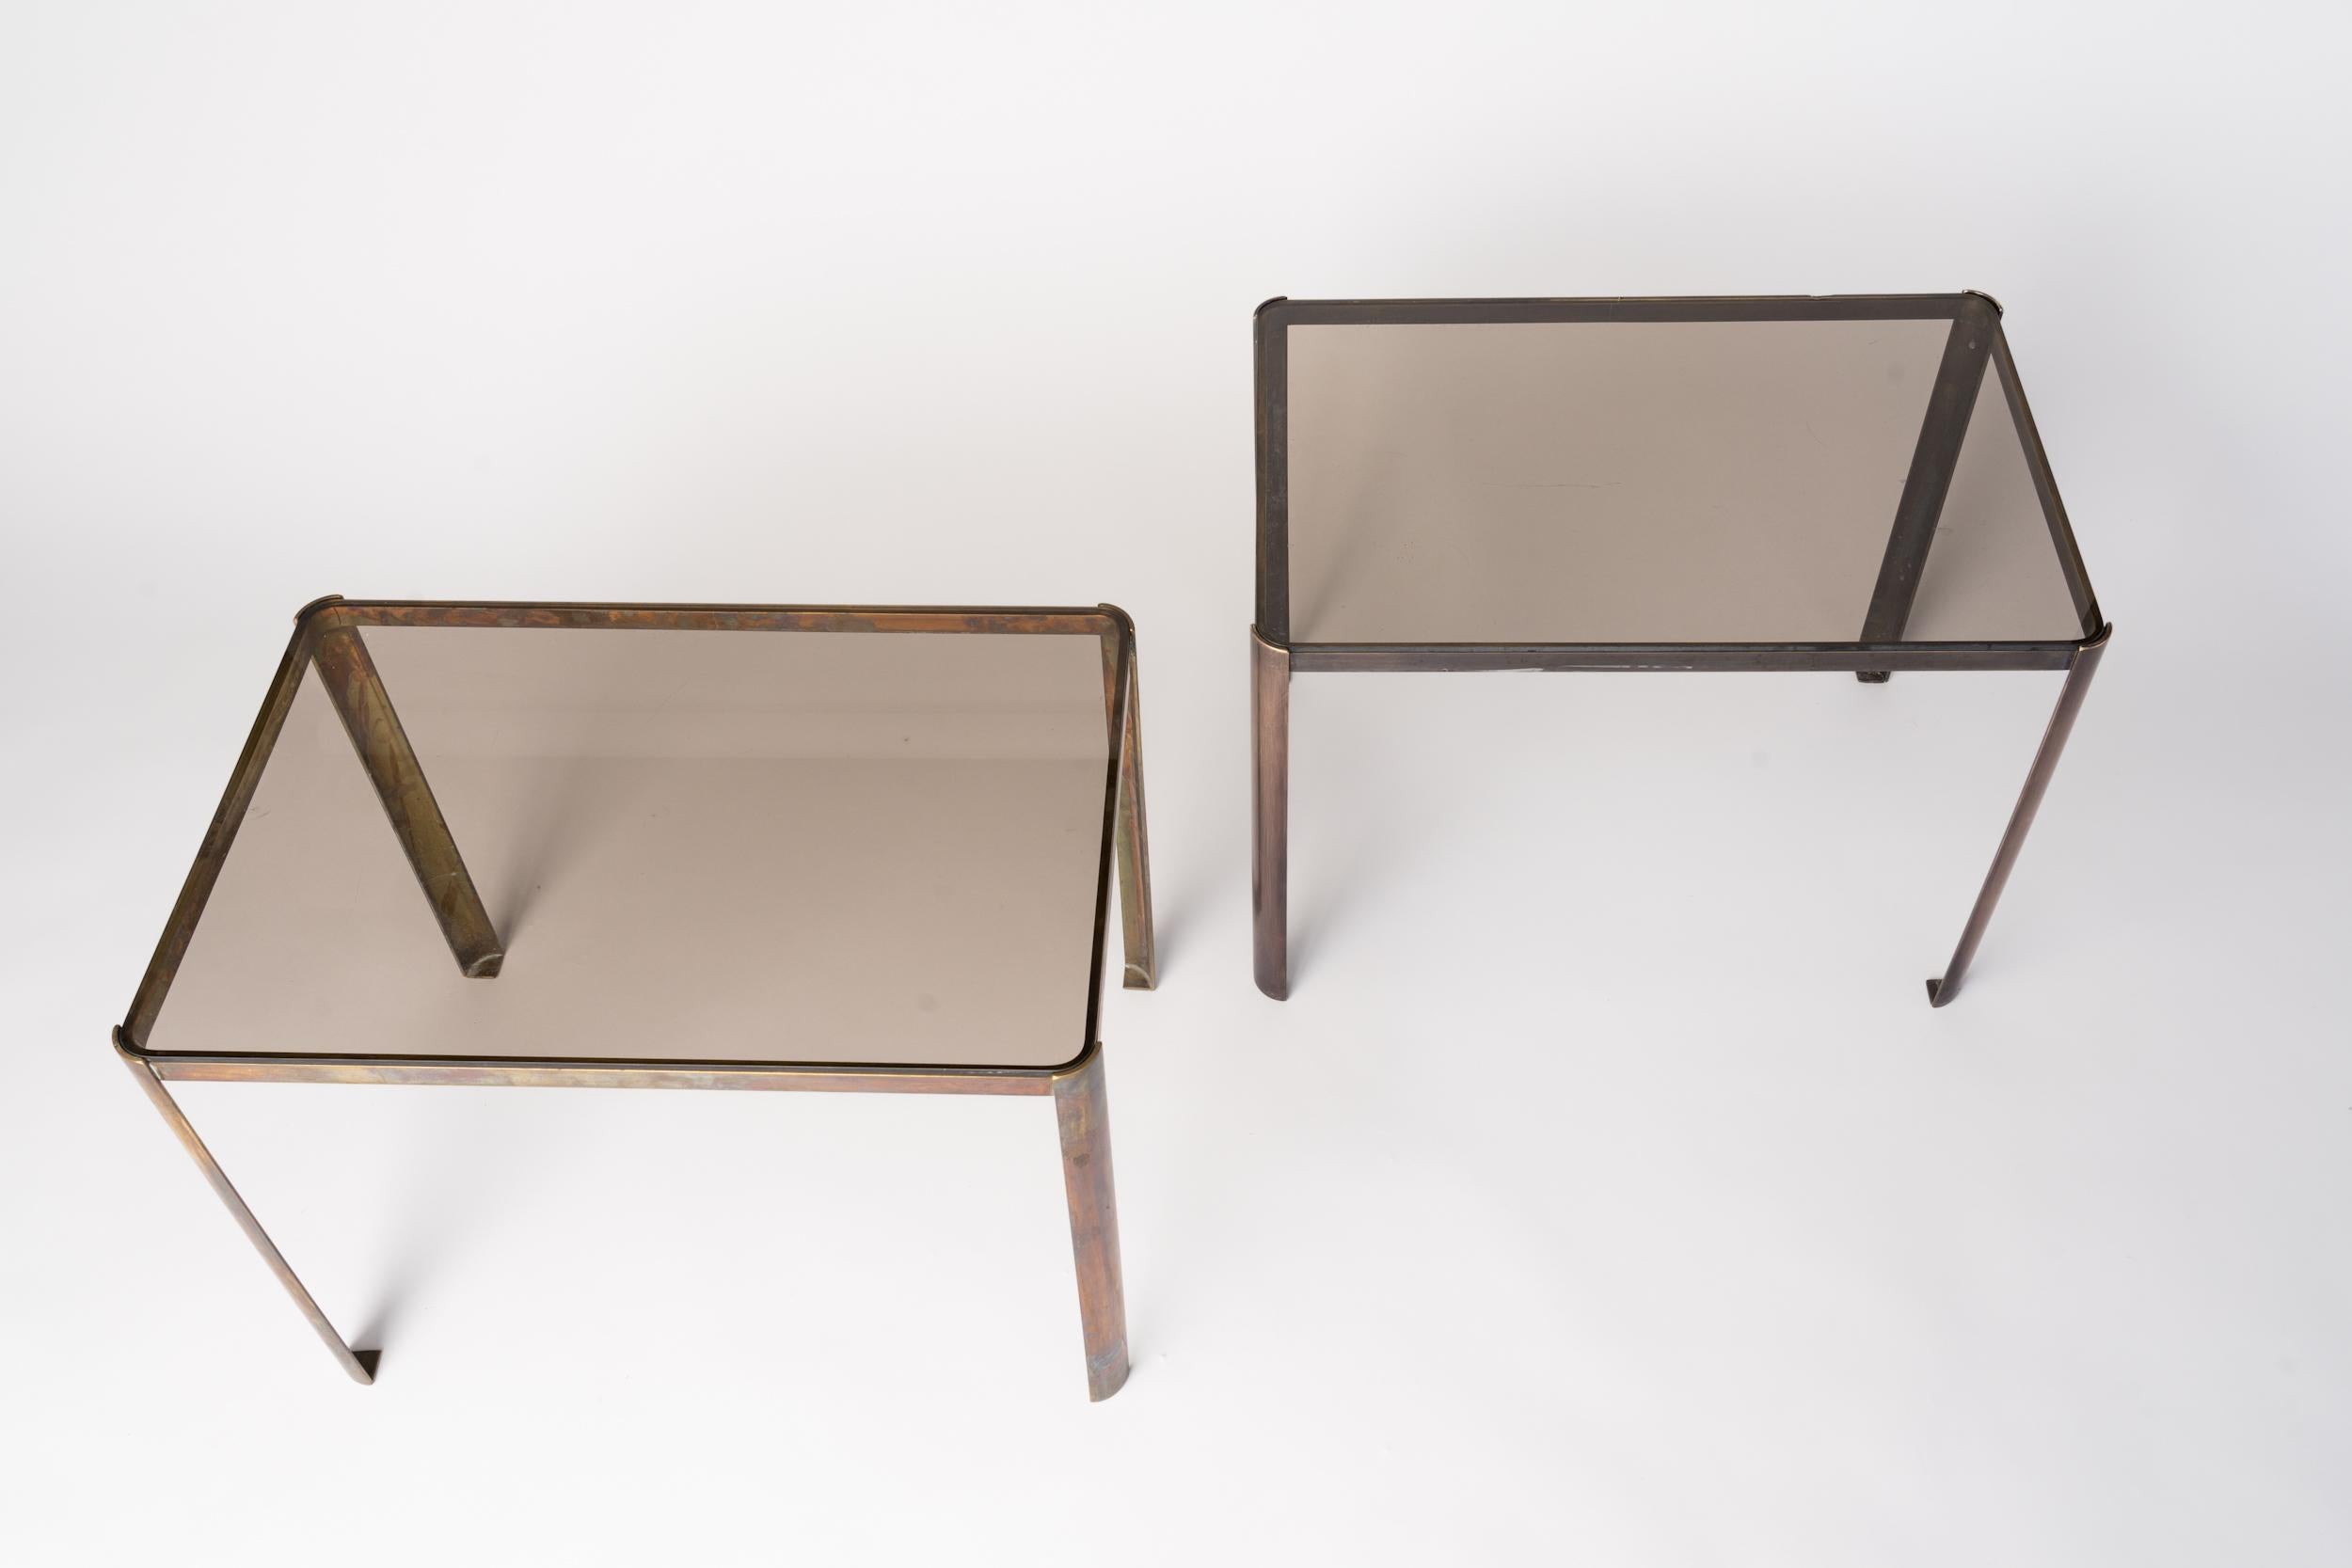 Pair of patinated bronze side tables by Téophile Lepelltier for atelier 